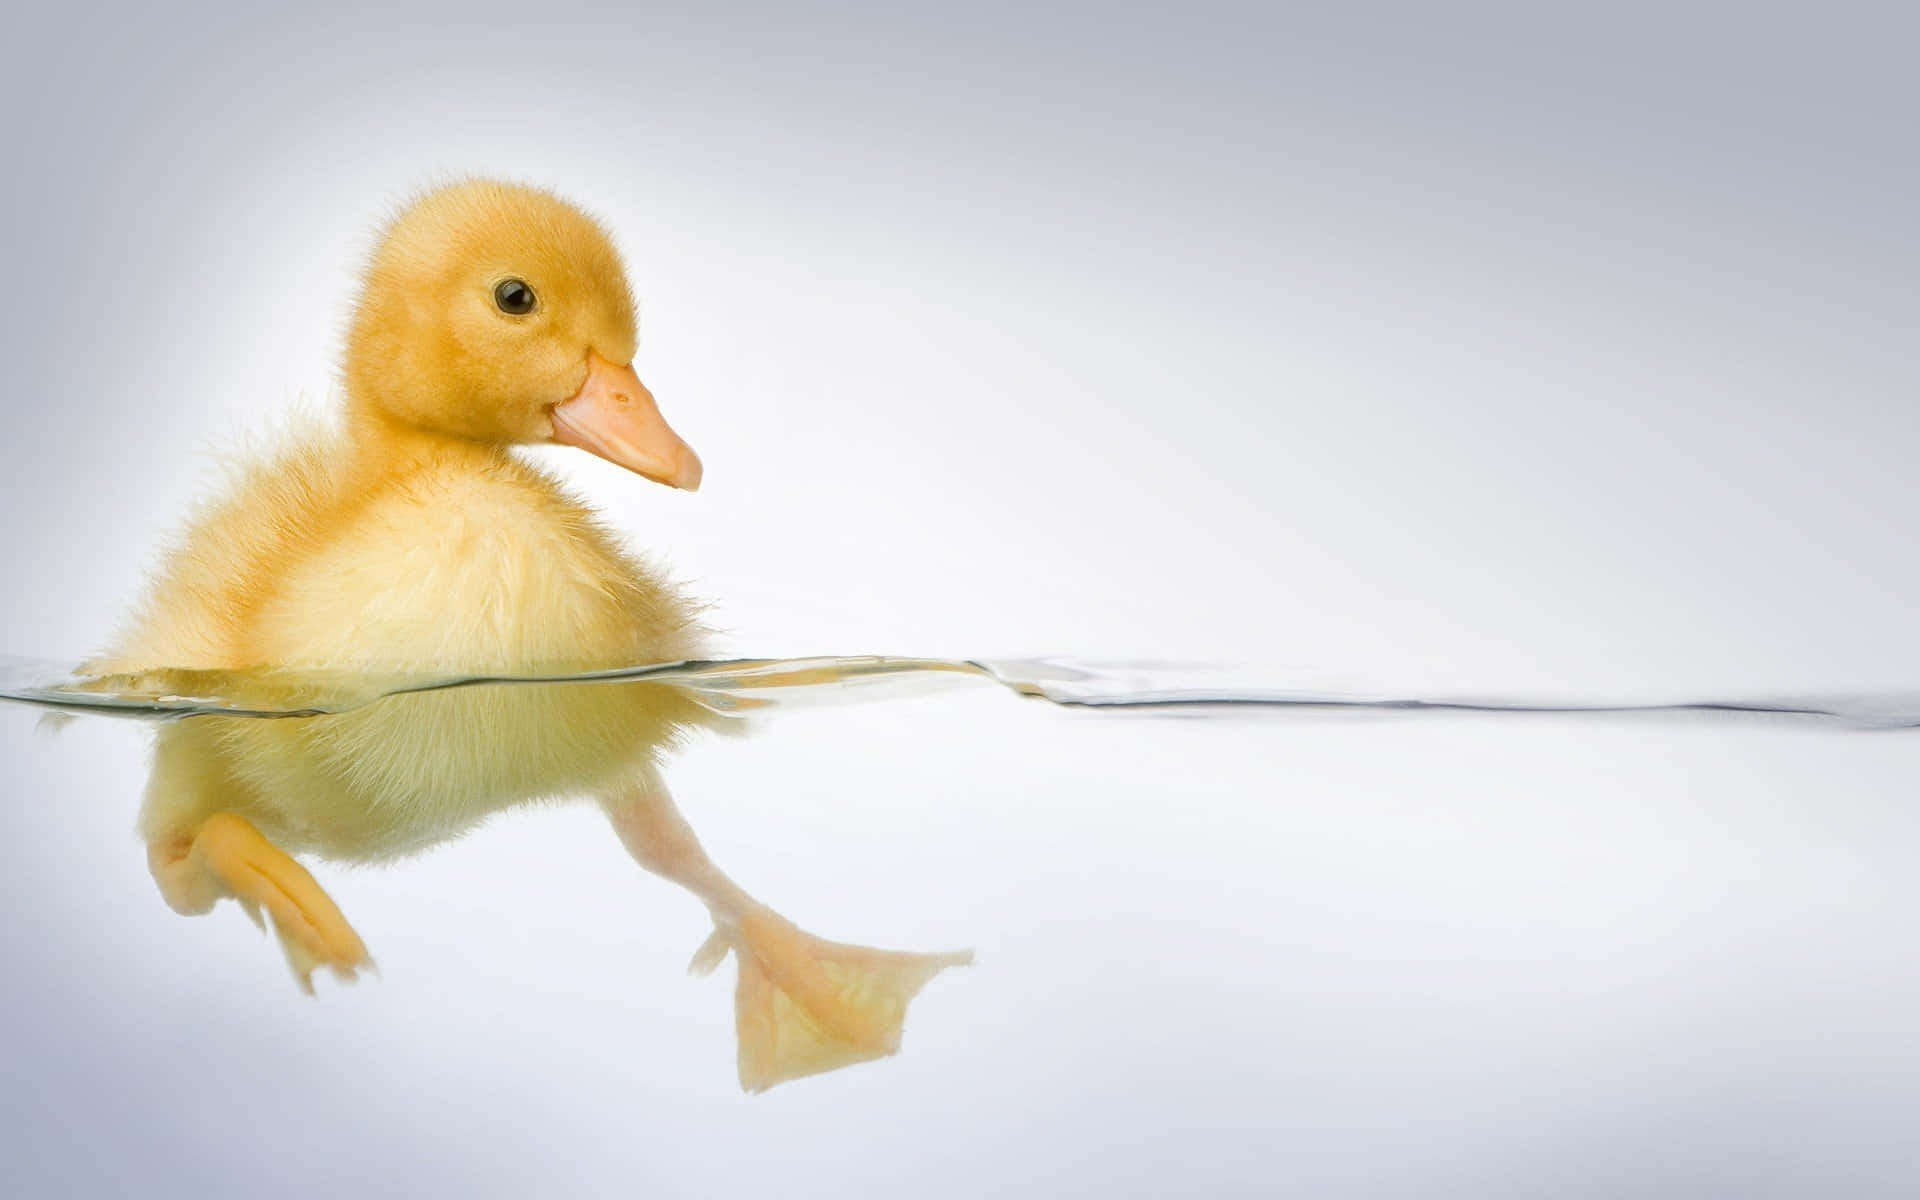 Adorable Yellow Duckling Wading in Shallow Water